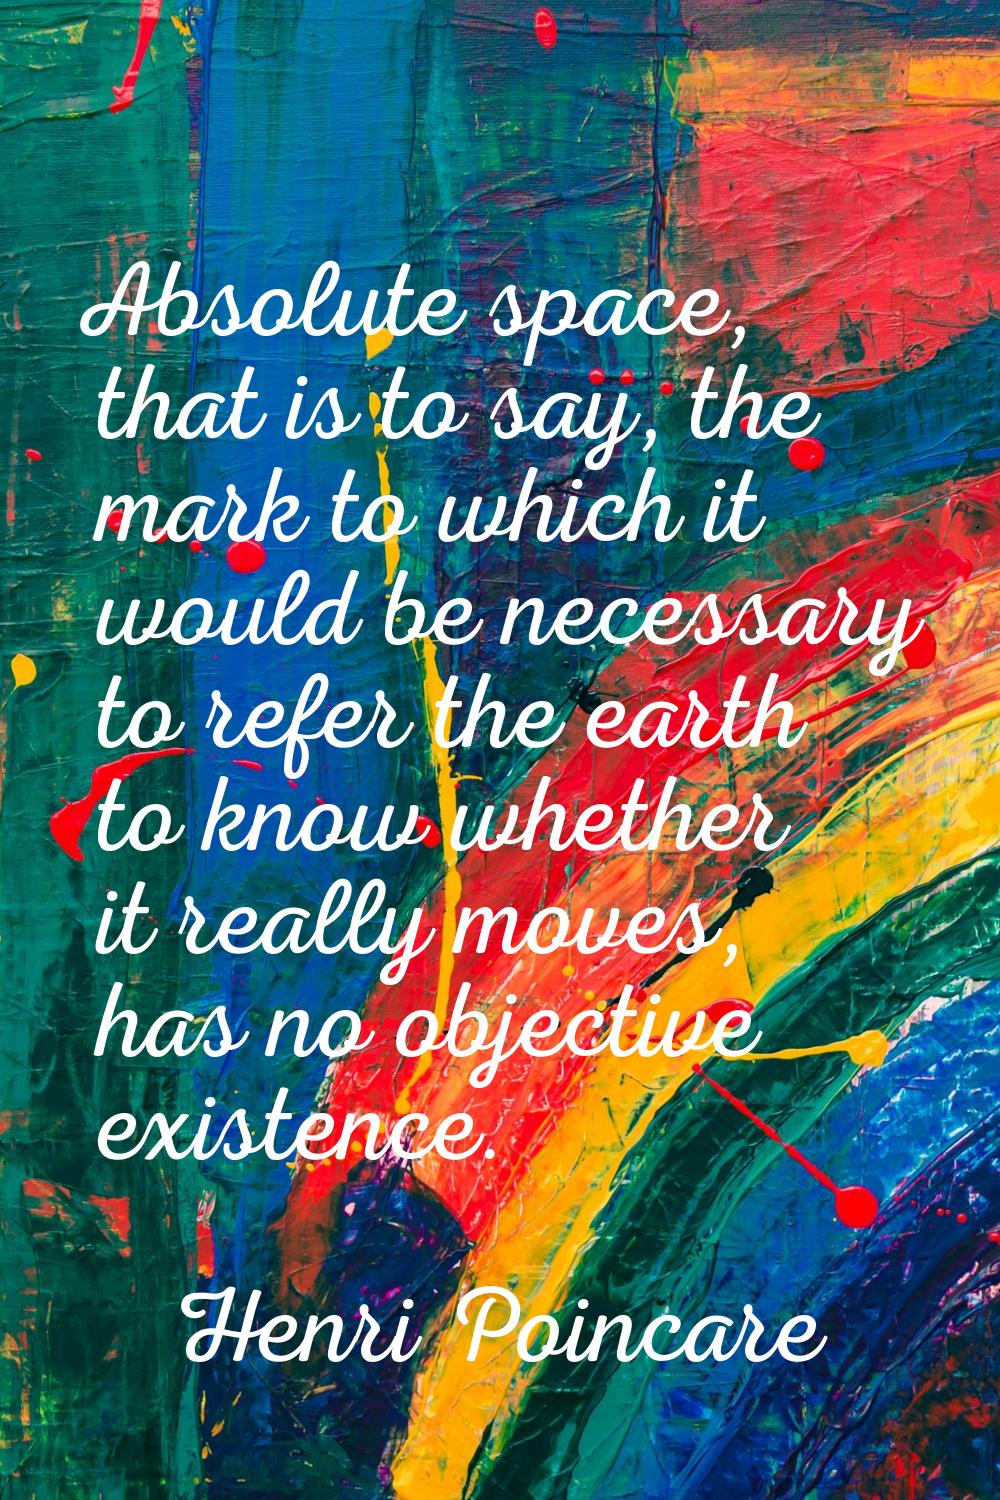 Absolute space, that is to say, the mark to which it would be necessary to refer the earth to know 